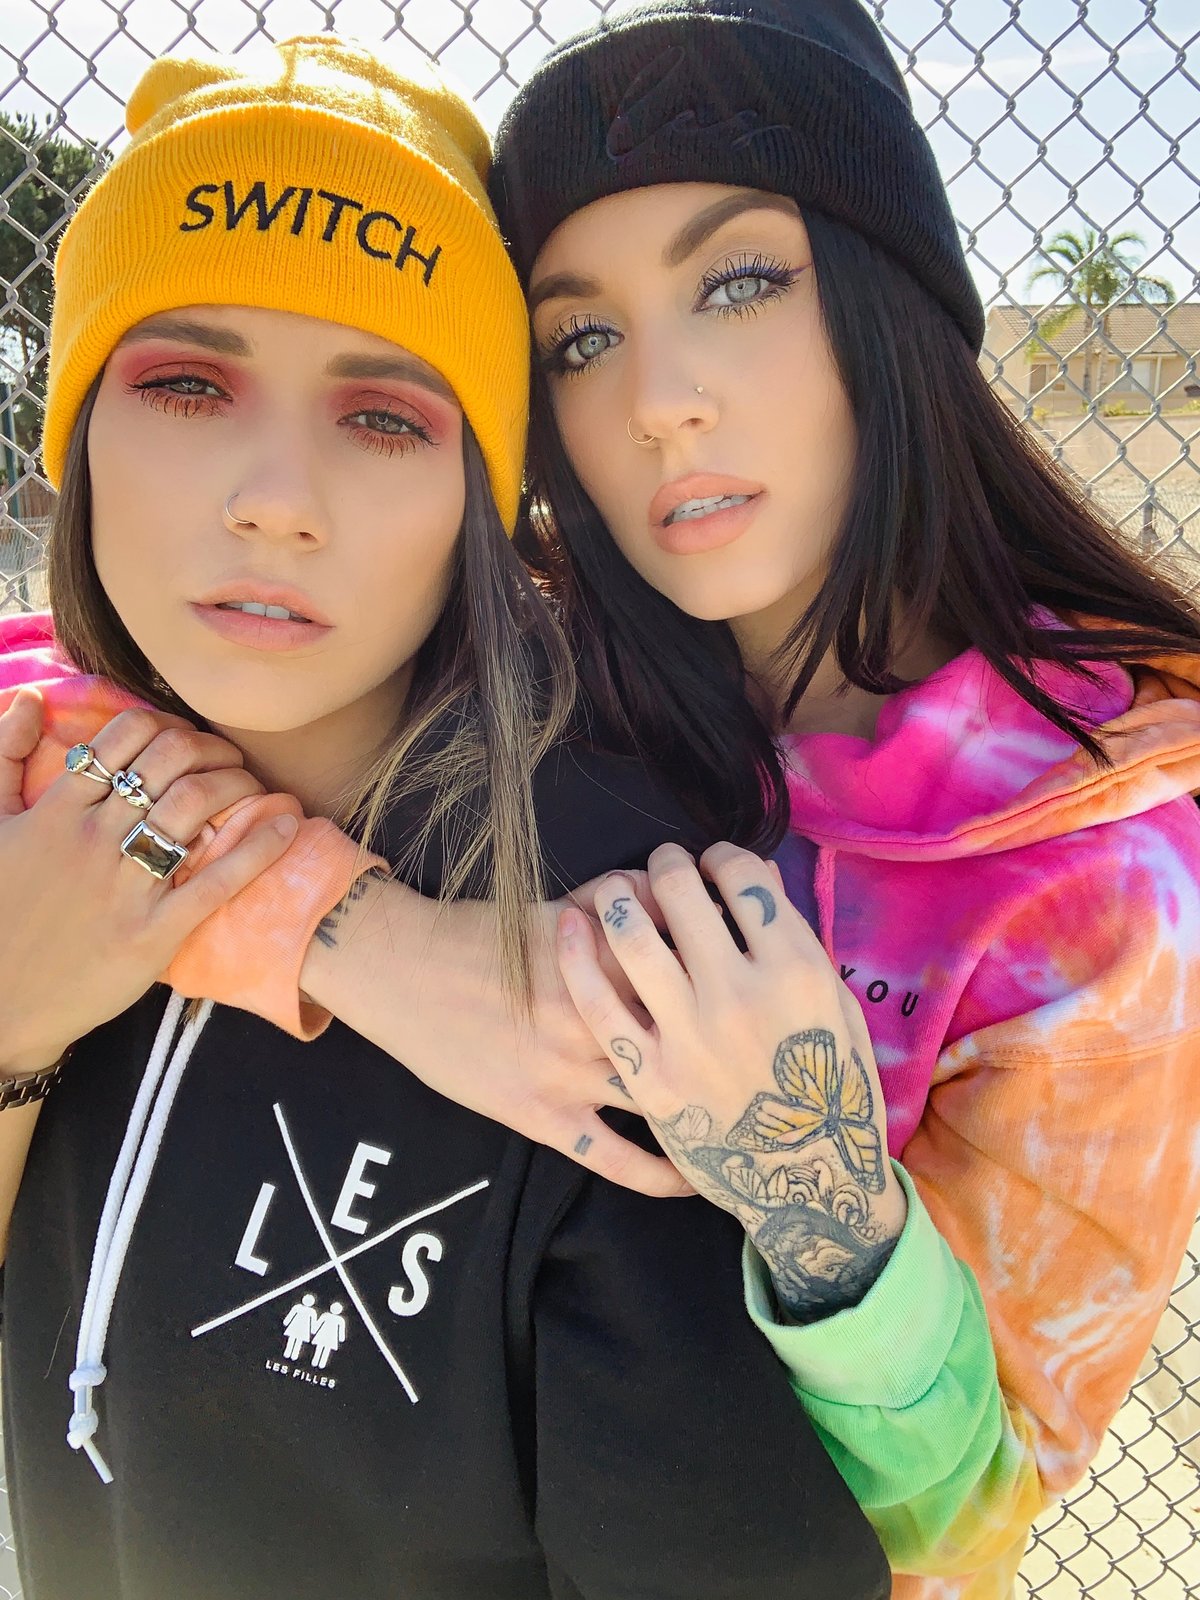 Image of Switch Beanie  - 3 Colors